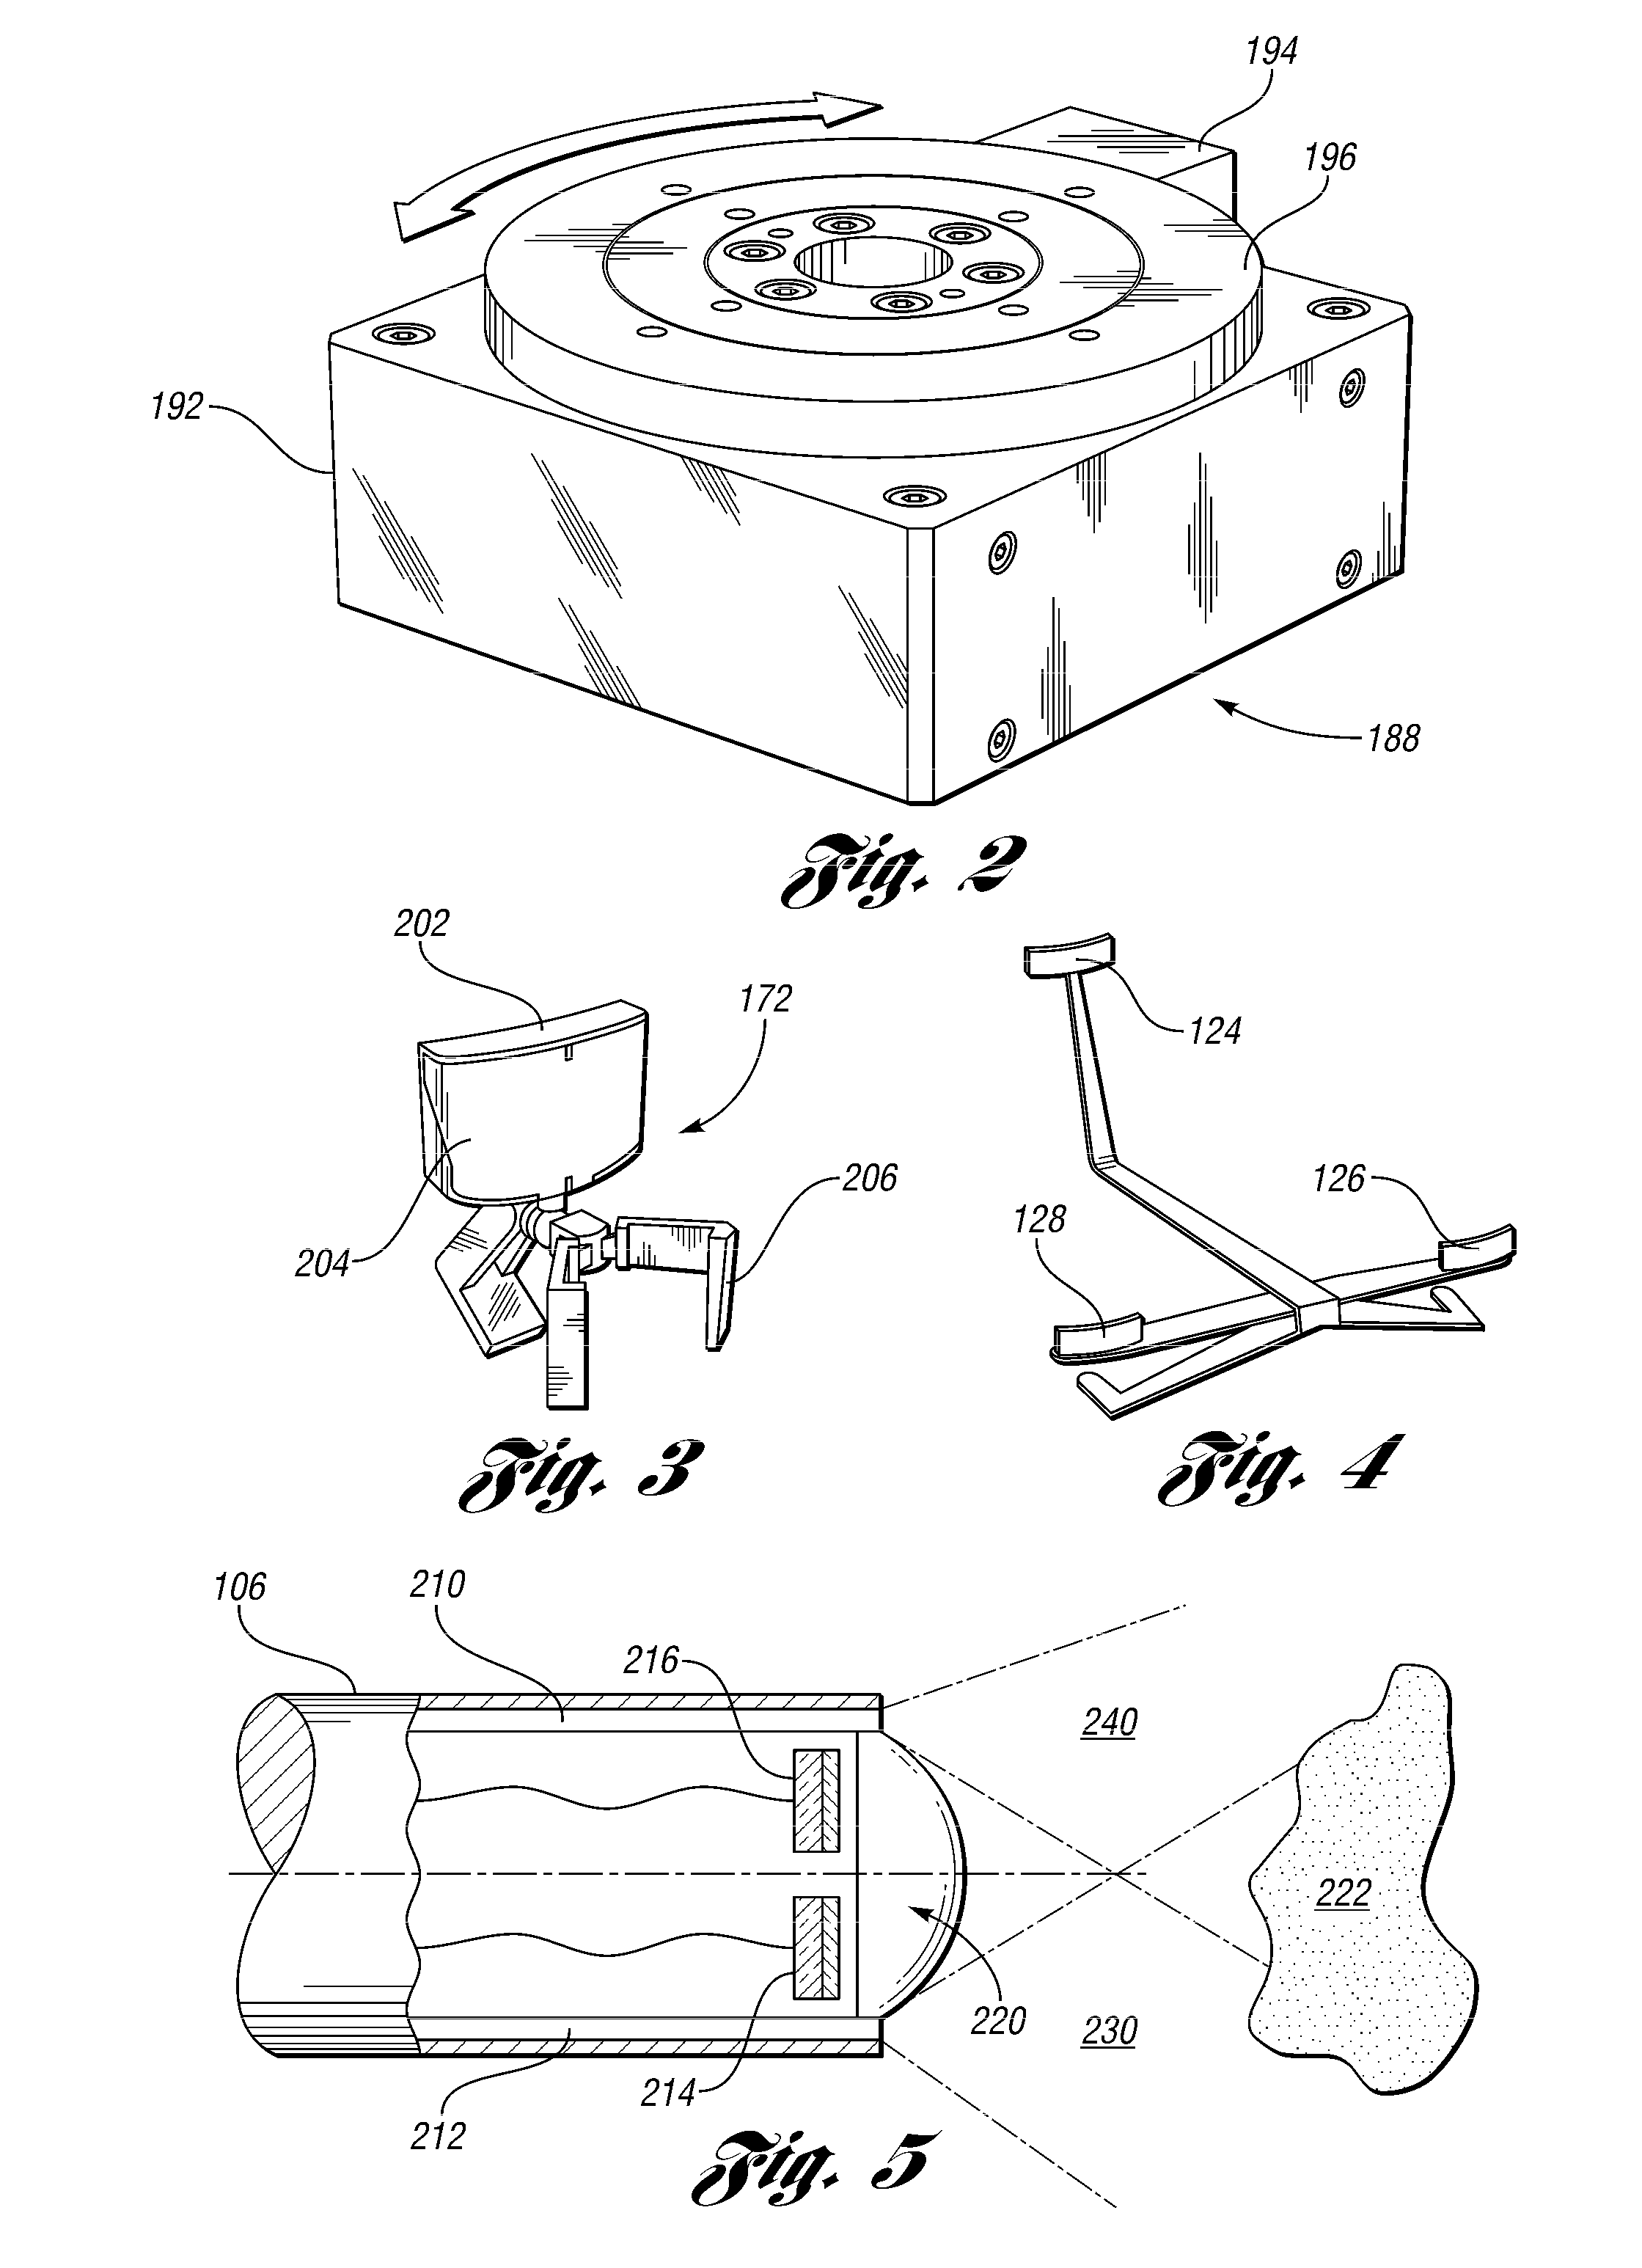 Endoscopic apparatus and method for producing via a holographic optical element an autostereoscopic 3-d image